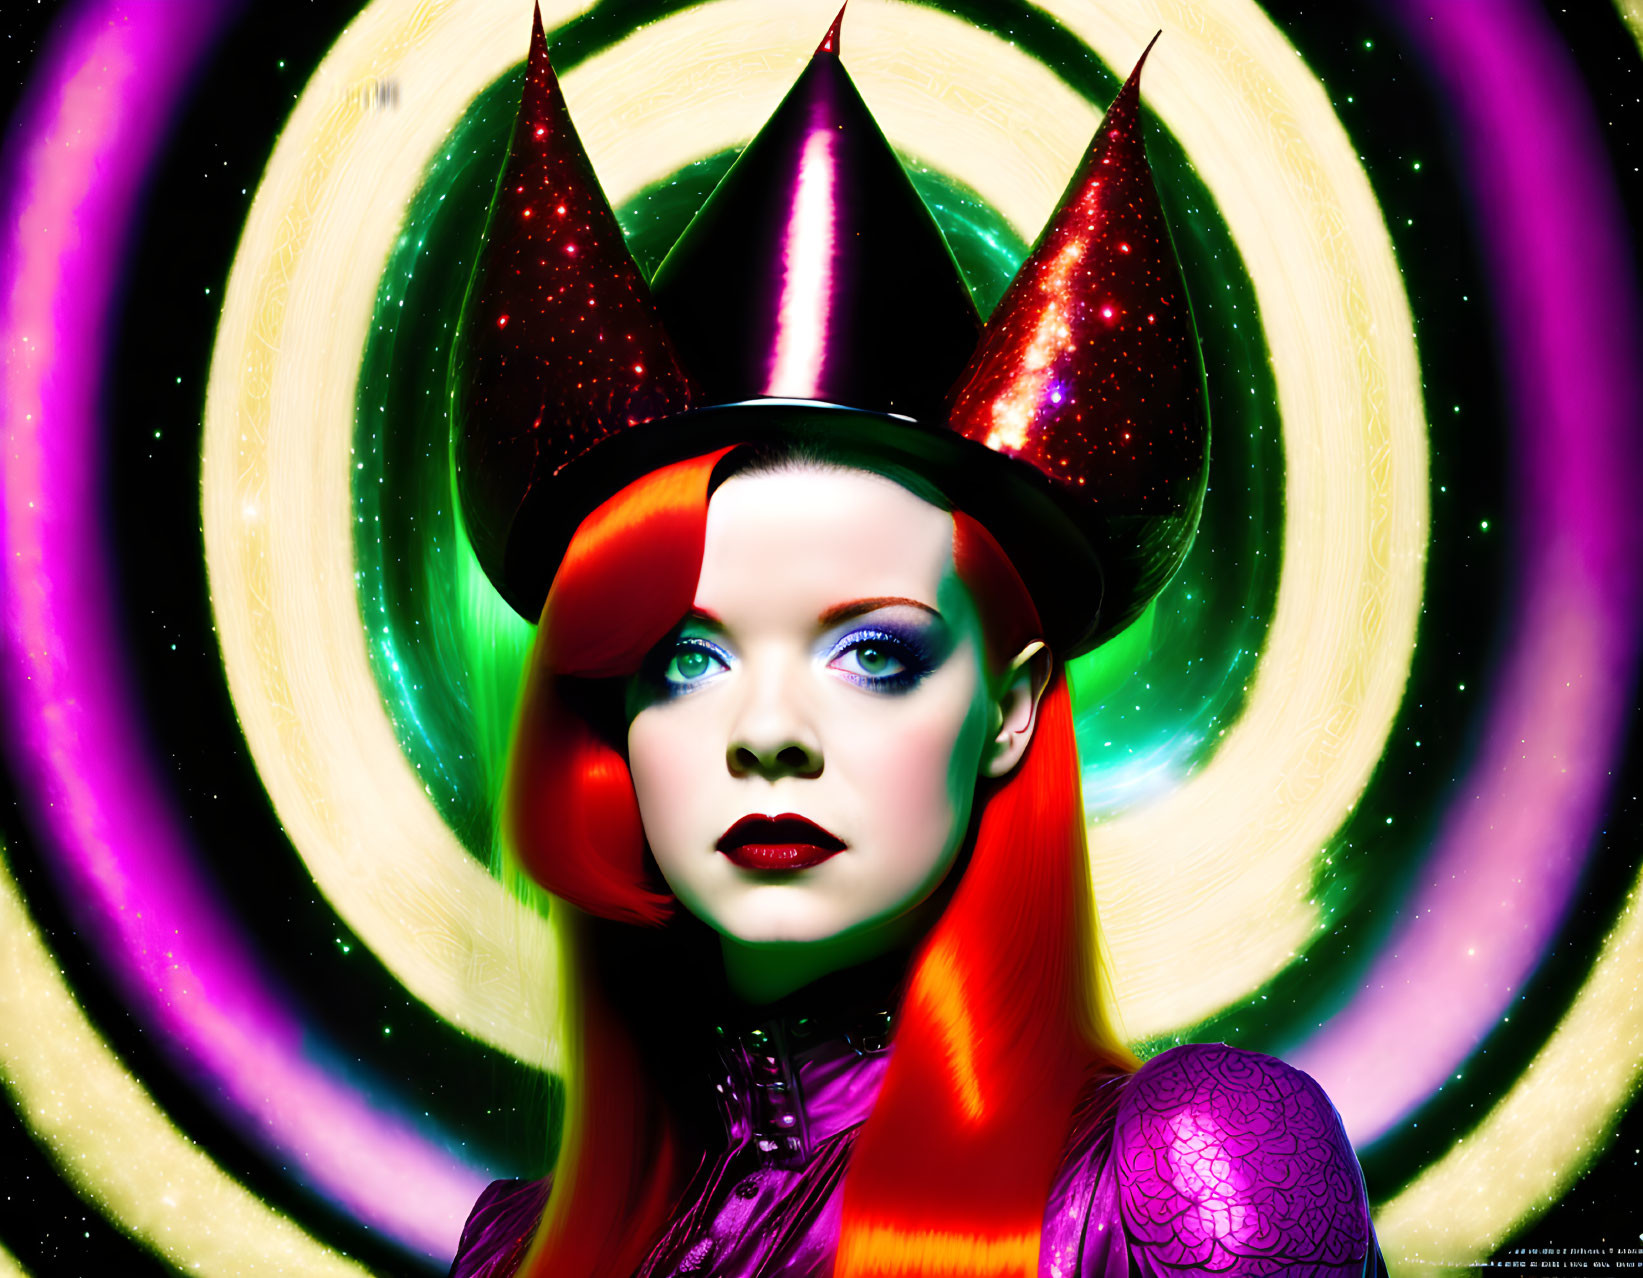 Vibrant Psychedelic Background with Woman in Red Hair & Party Hats